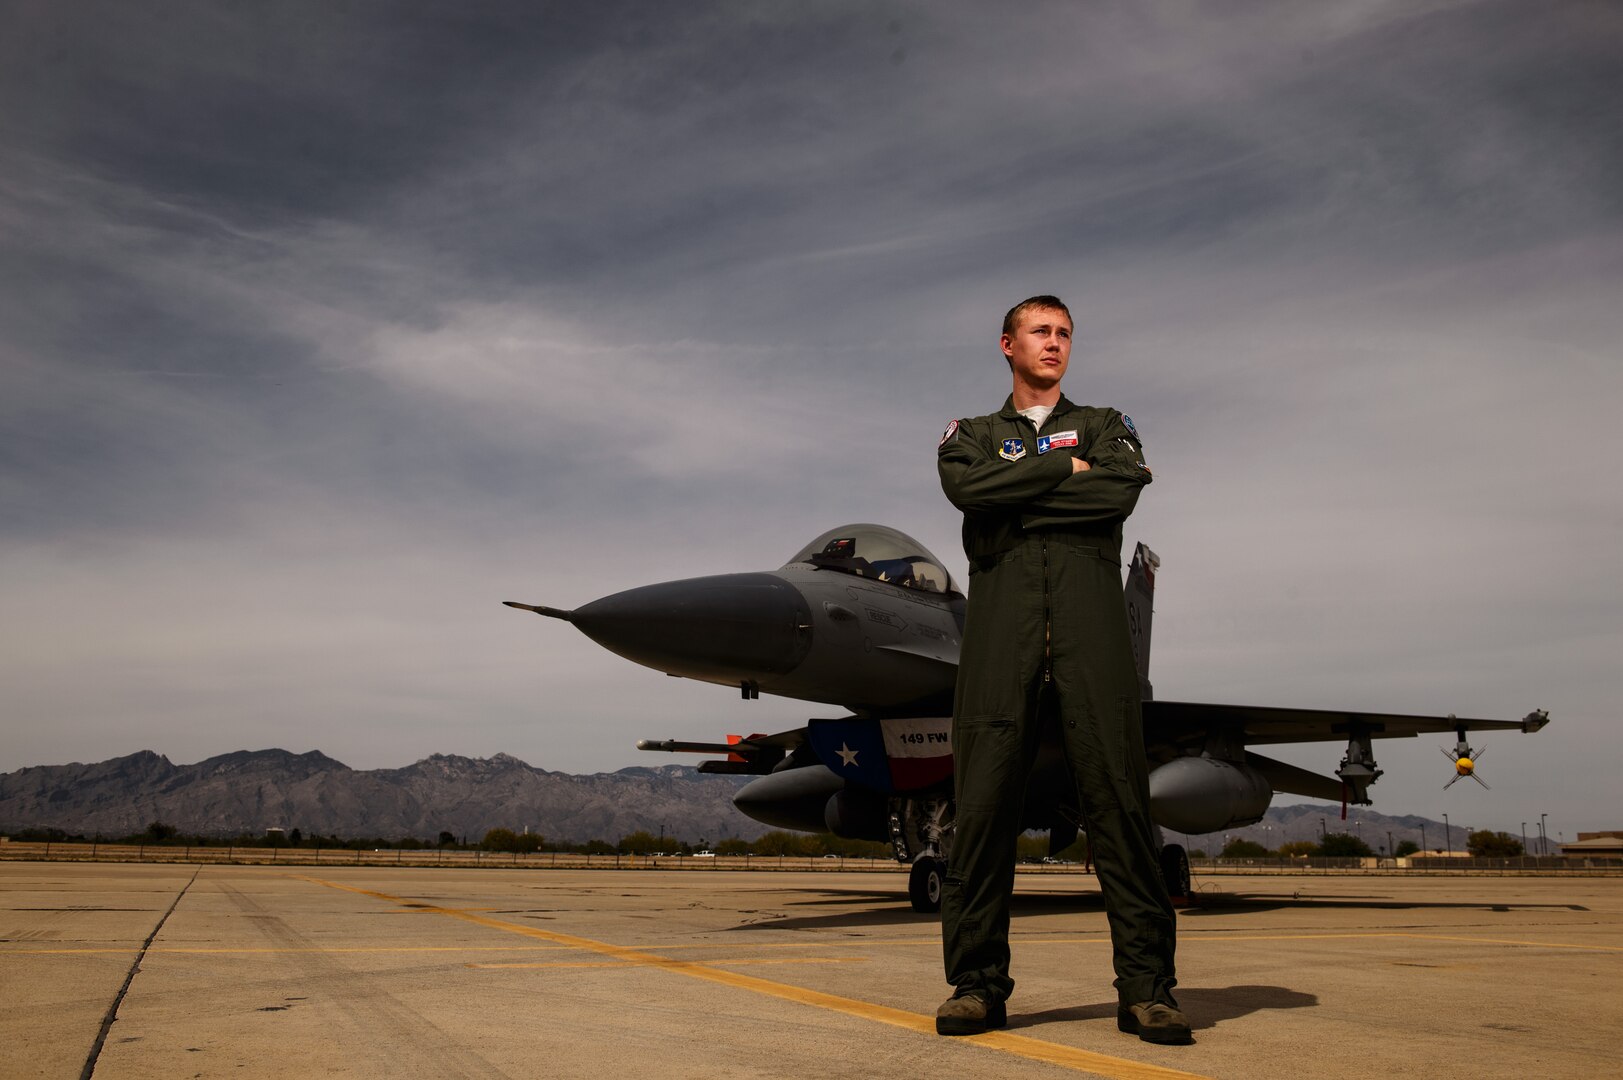 First Lt. John Nygard, 182nd Fighter Squadron, is an F-16 Fighting Falcon student pilot participating in Coronet Cactus exercise at Davis-Monthan Air Force Base, Ariz., April 9, 2014. This exercise provides realistic combat training for student fighter pilots from air-to-air combat to dropping inert and live ordnance. (U.S. Air Force photo/ Staff Sgt. Jonathan Snyder)